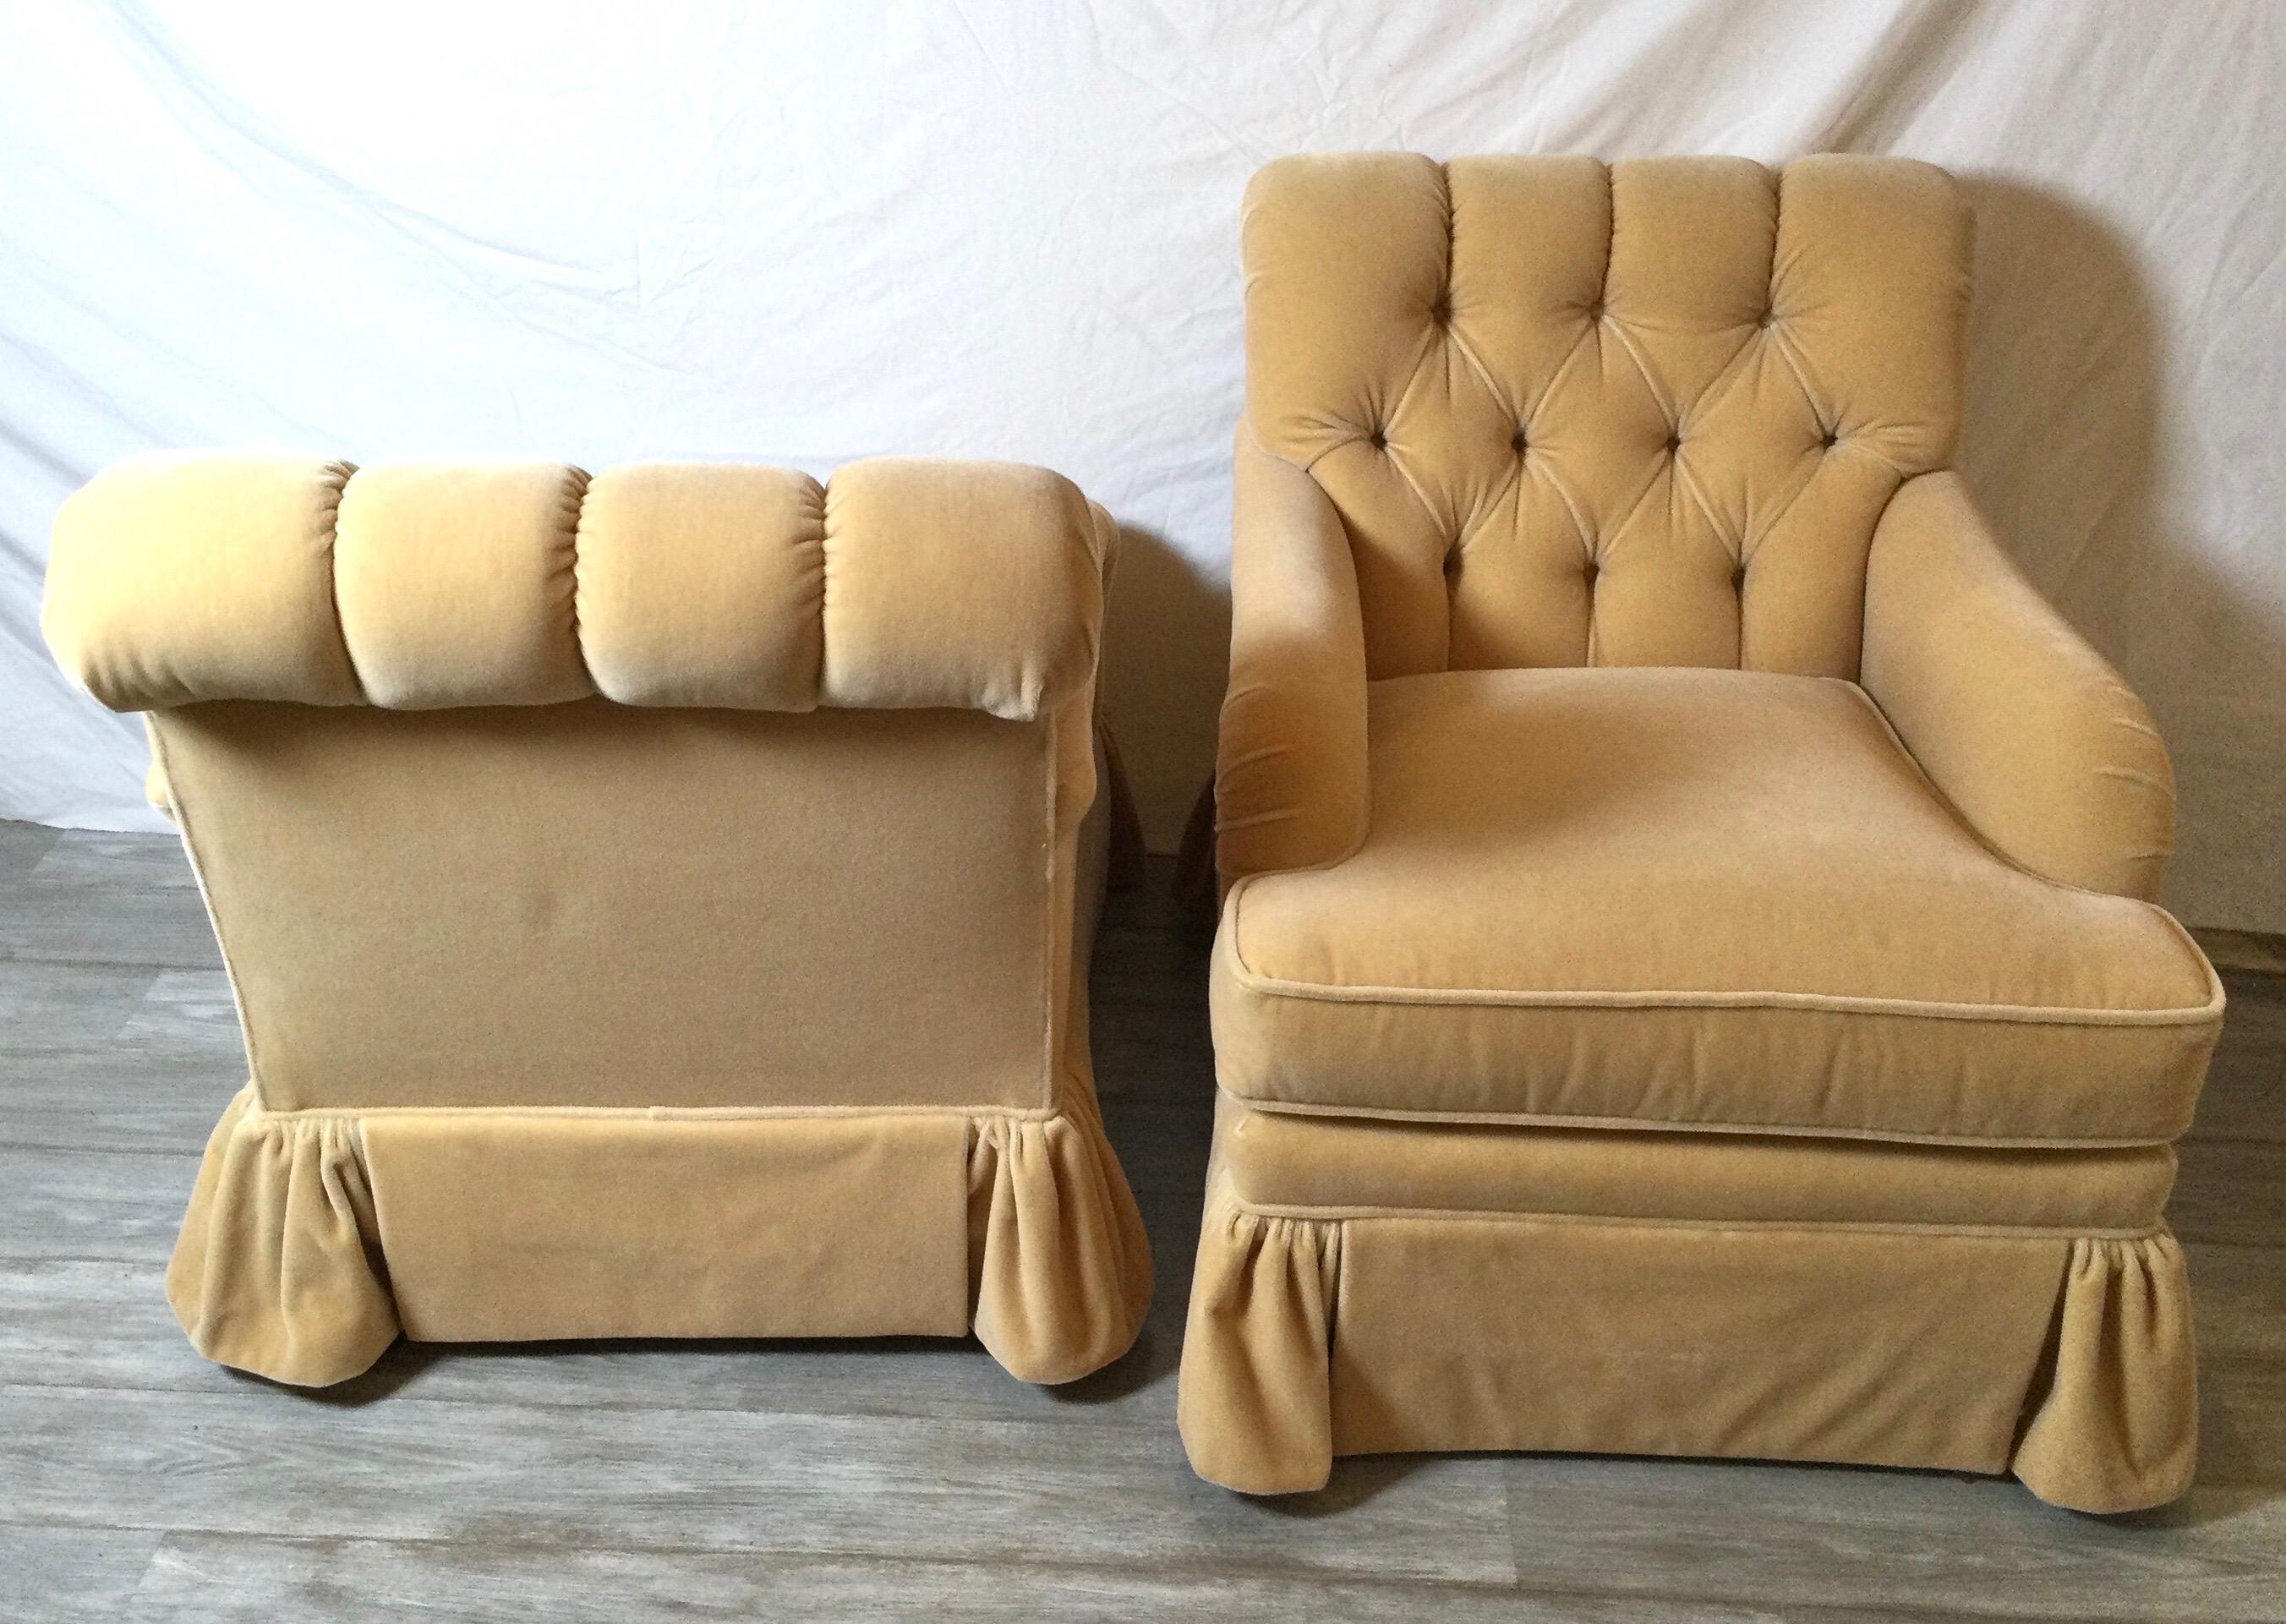 North American Late 20th Century Pair of Fawn Colored Mohair Club Chairs with Tufted Backs